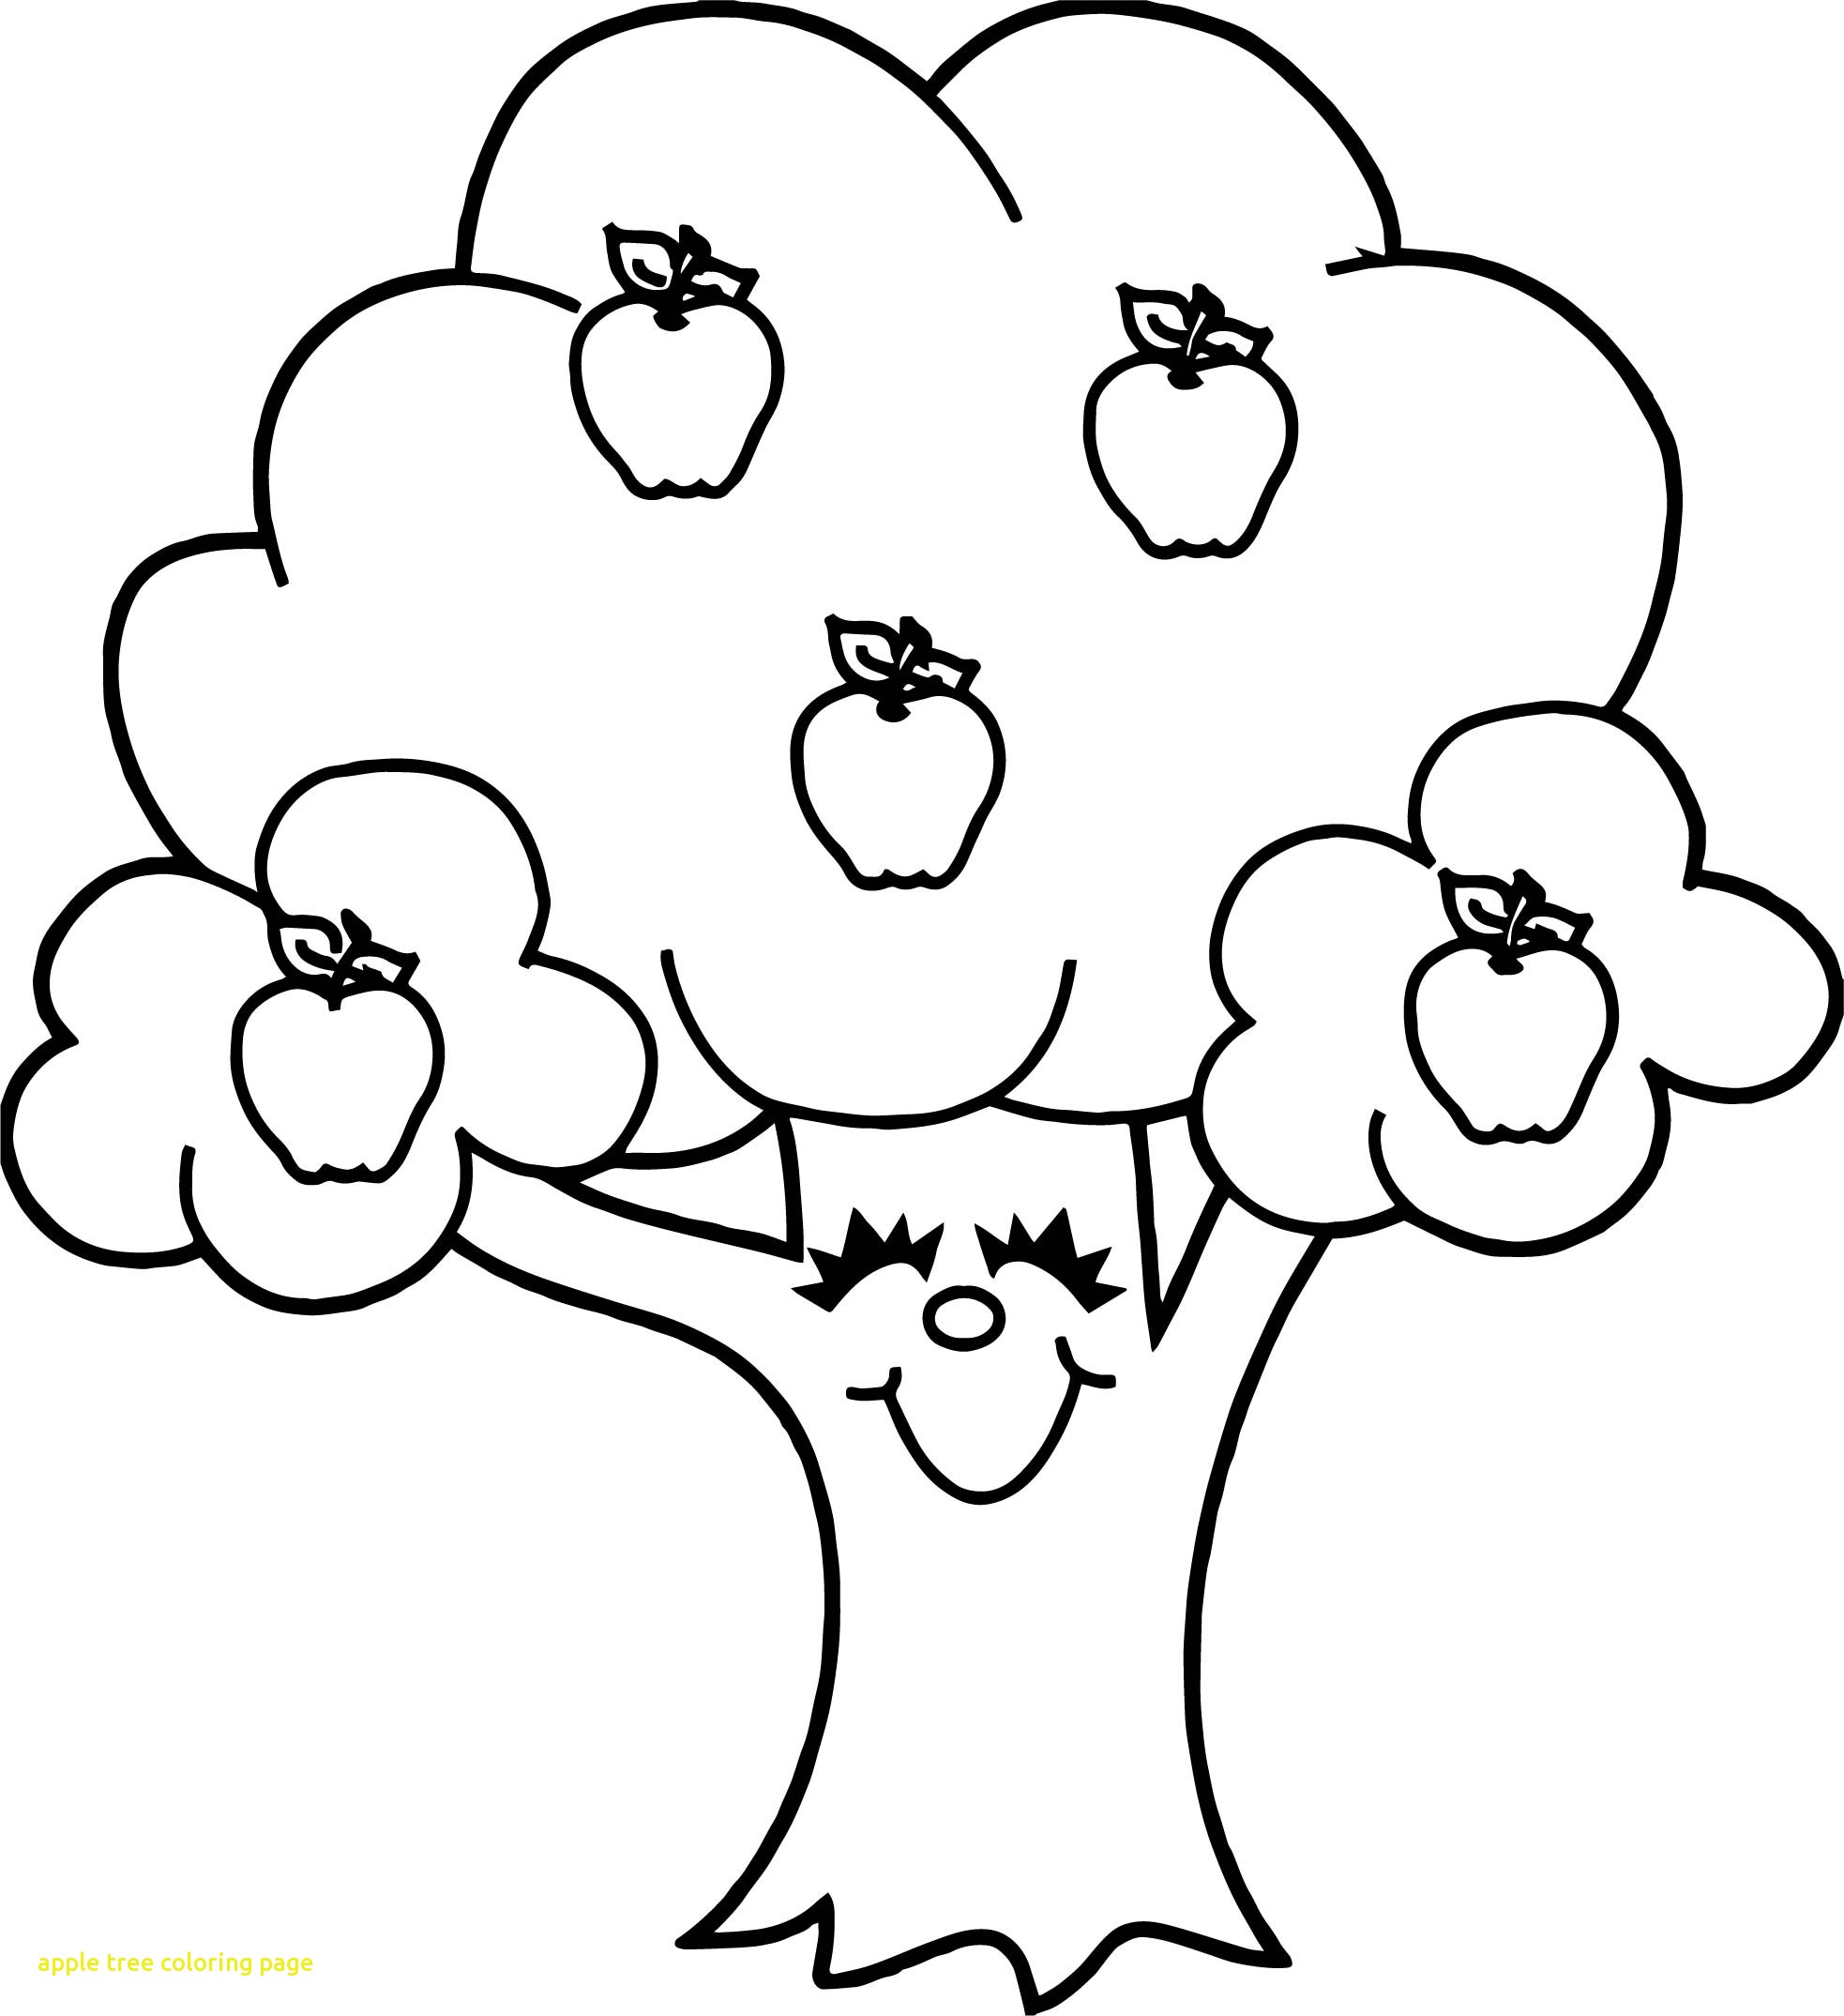 Free Printable Apple Tree Coloring Pages Printable Templates